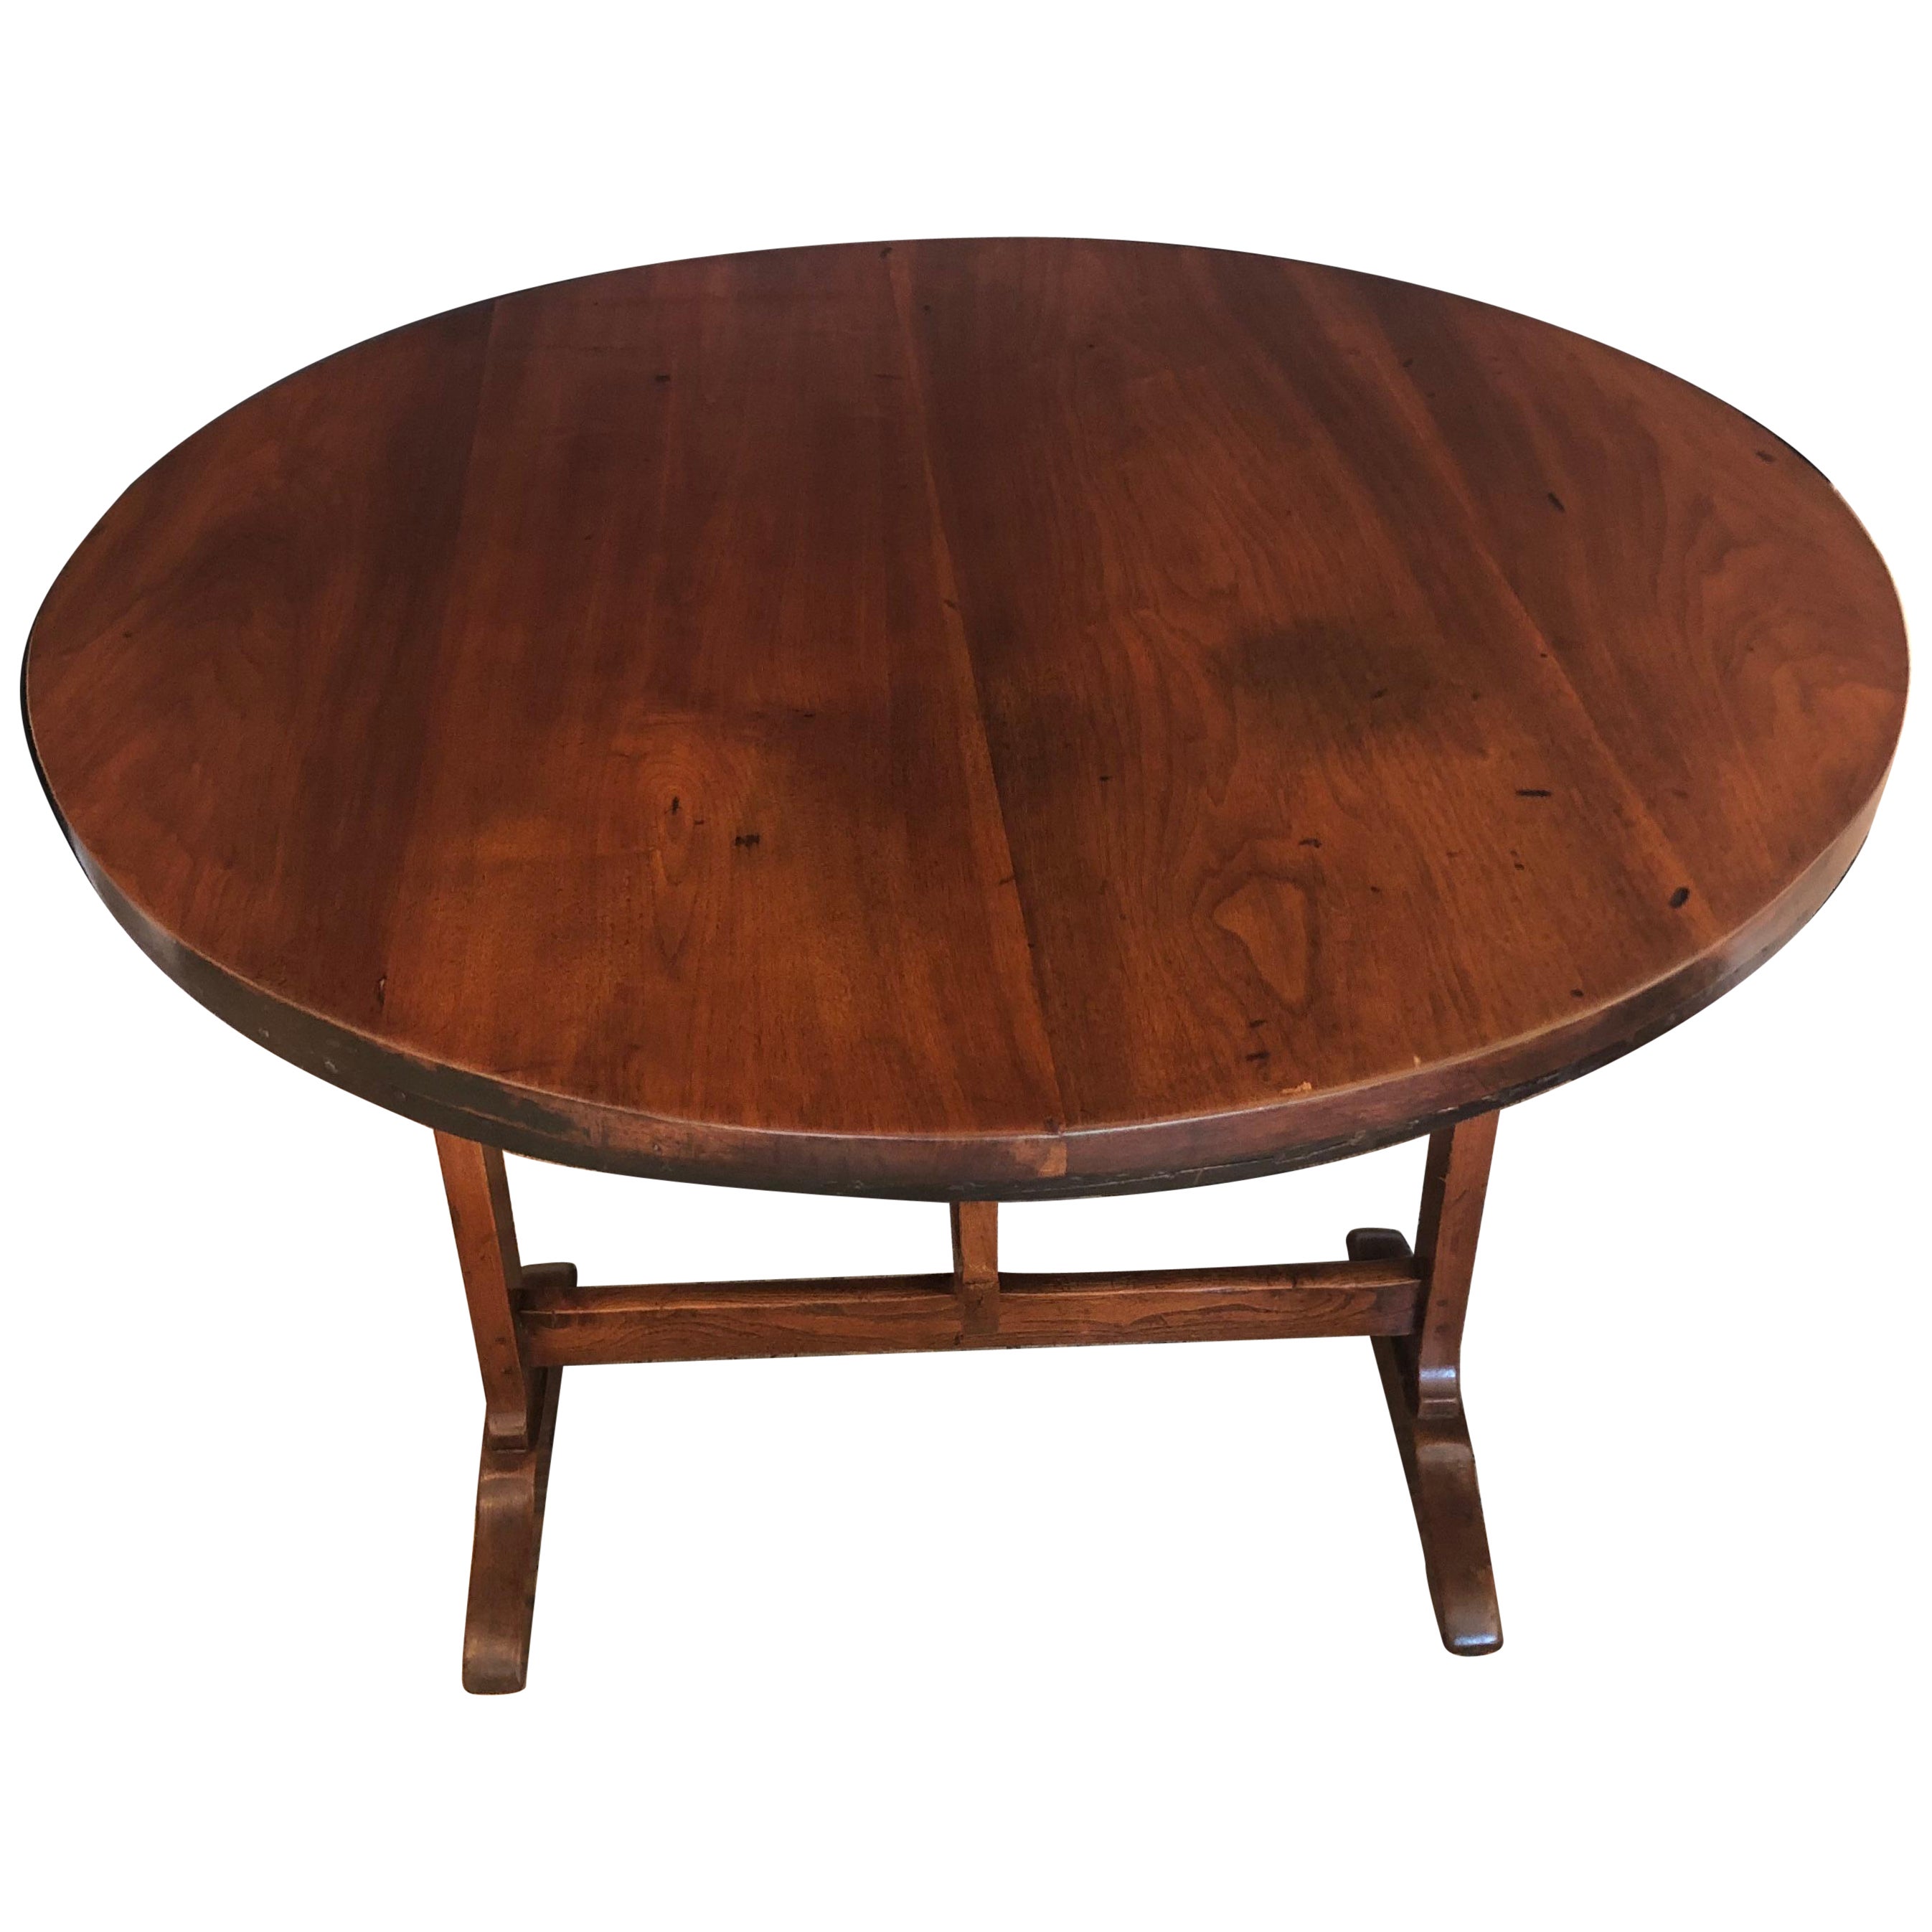 19th Century Round Mahogany Tilt Top Dining Wine Tasting Table For Sale